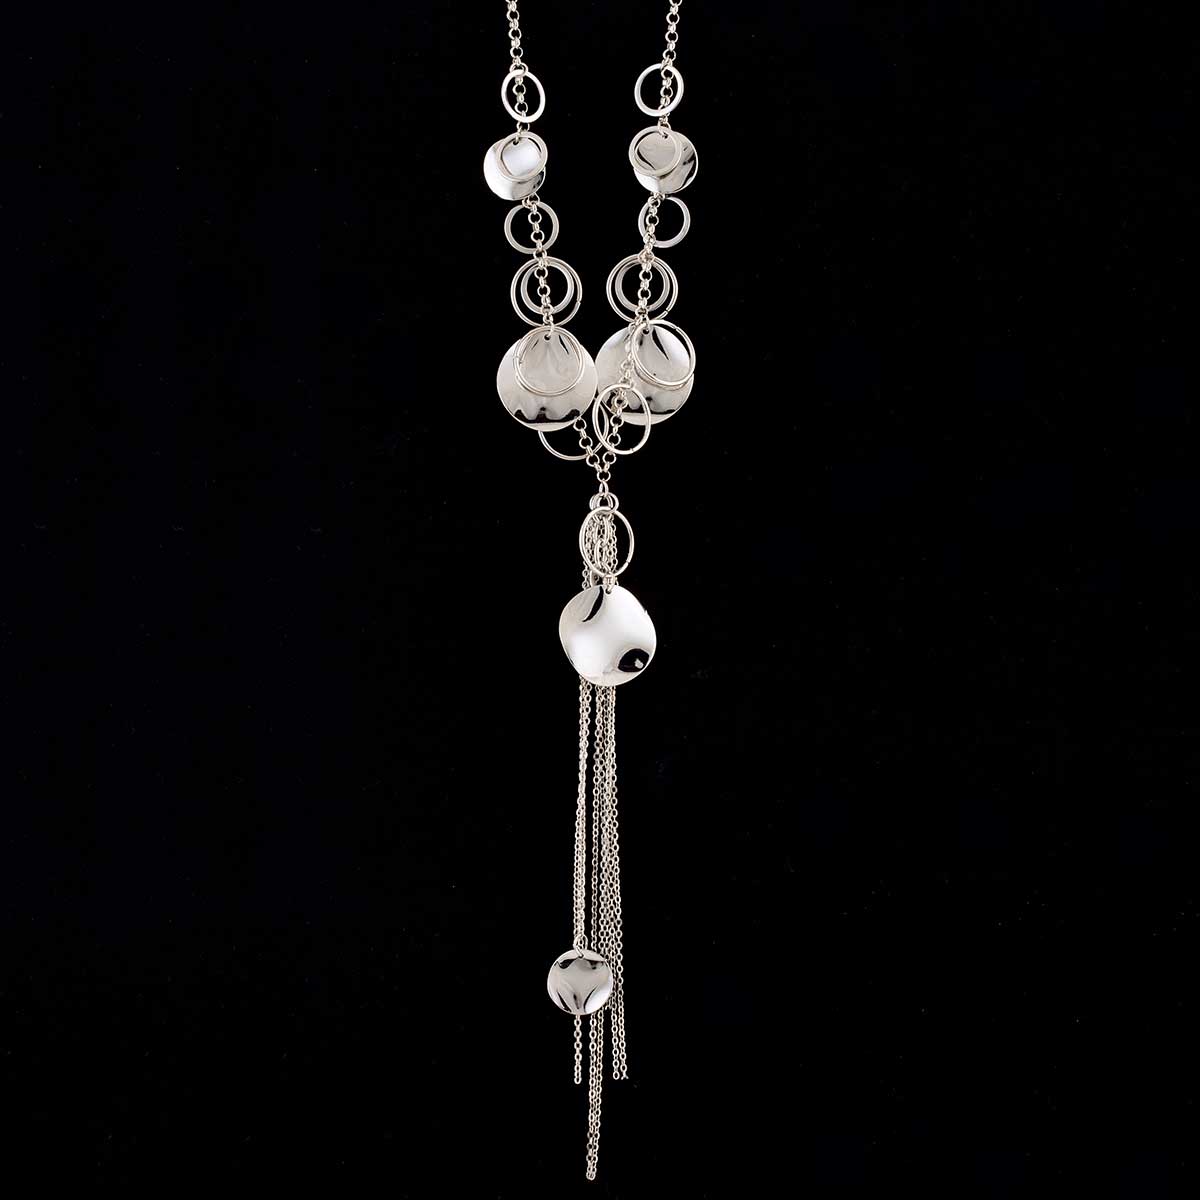 Silver Multi Circle and Tassel Necklace on Chain